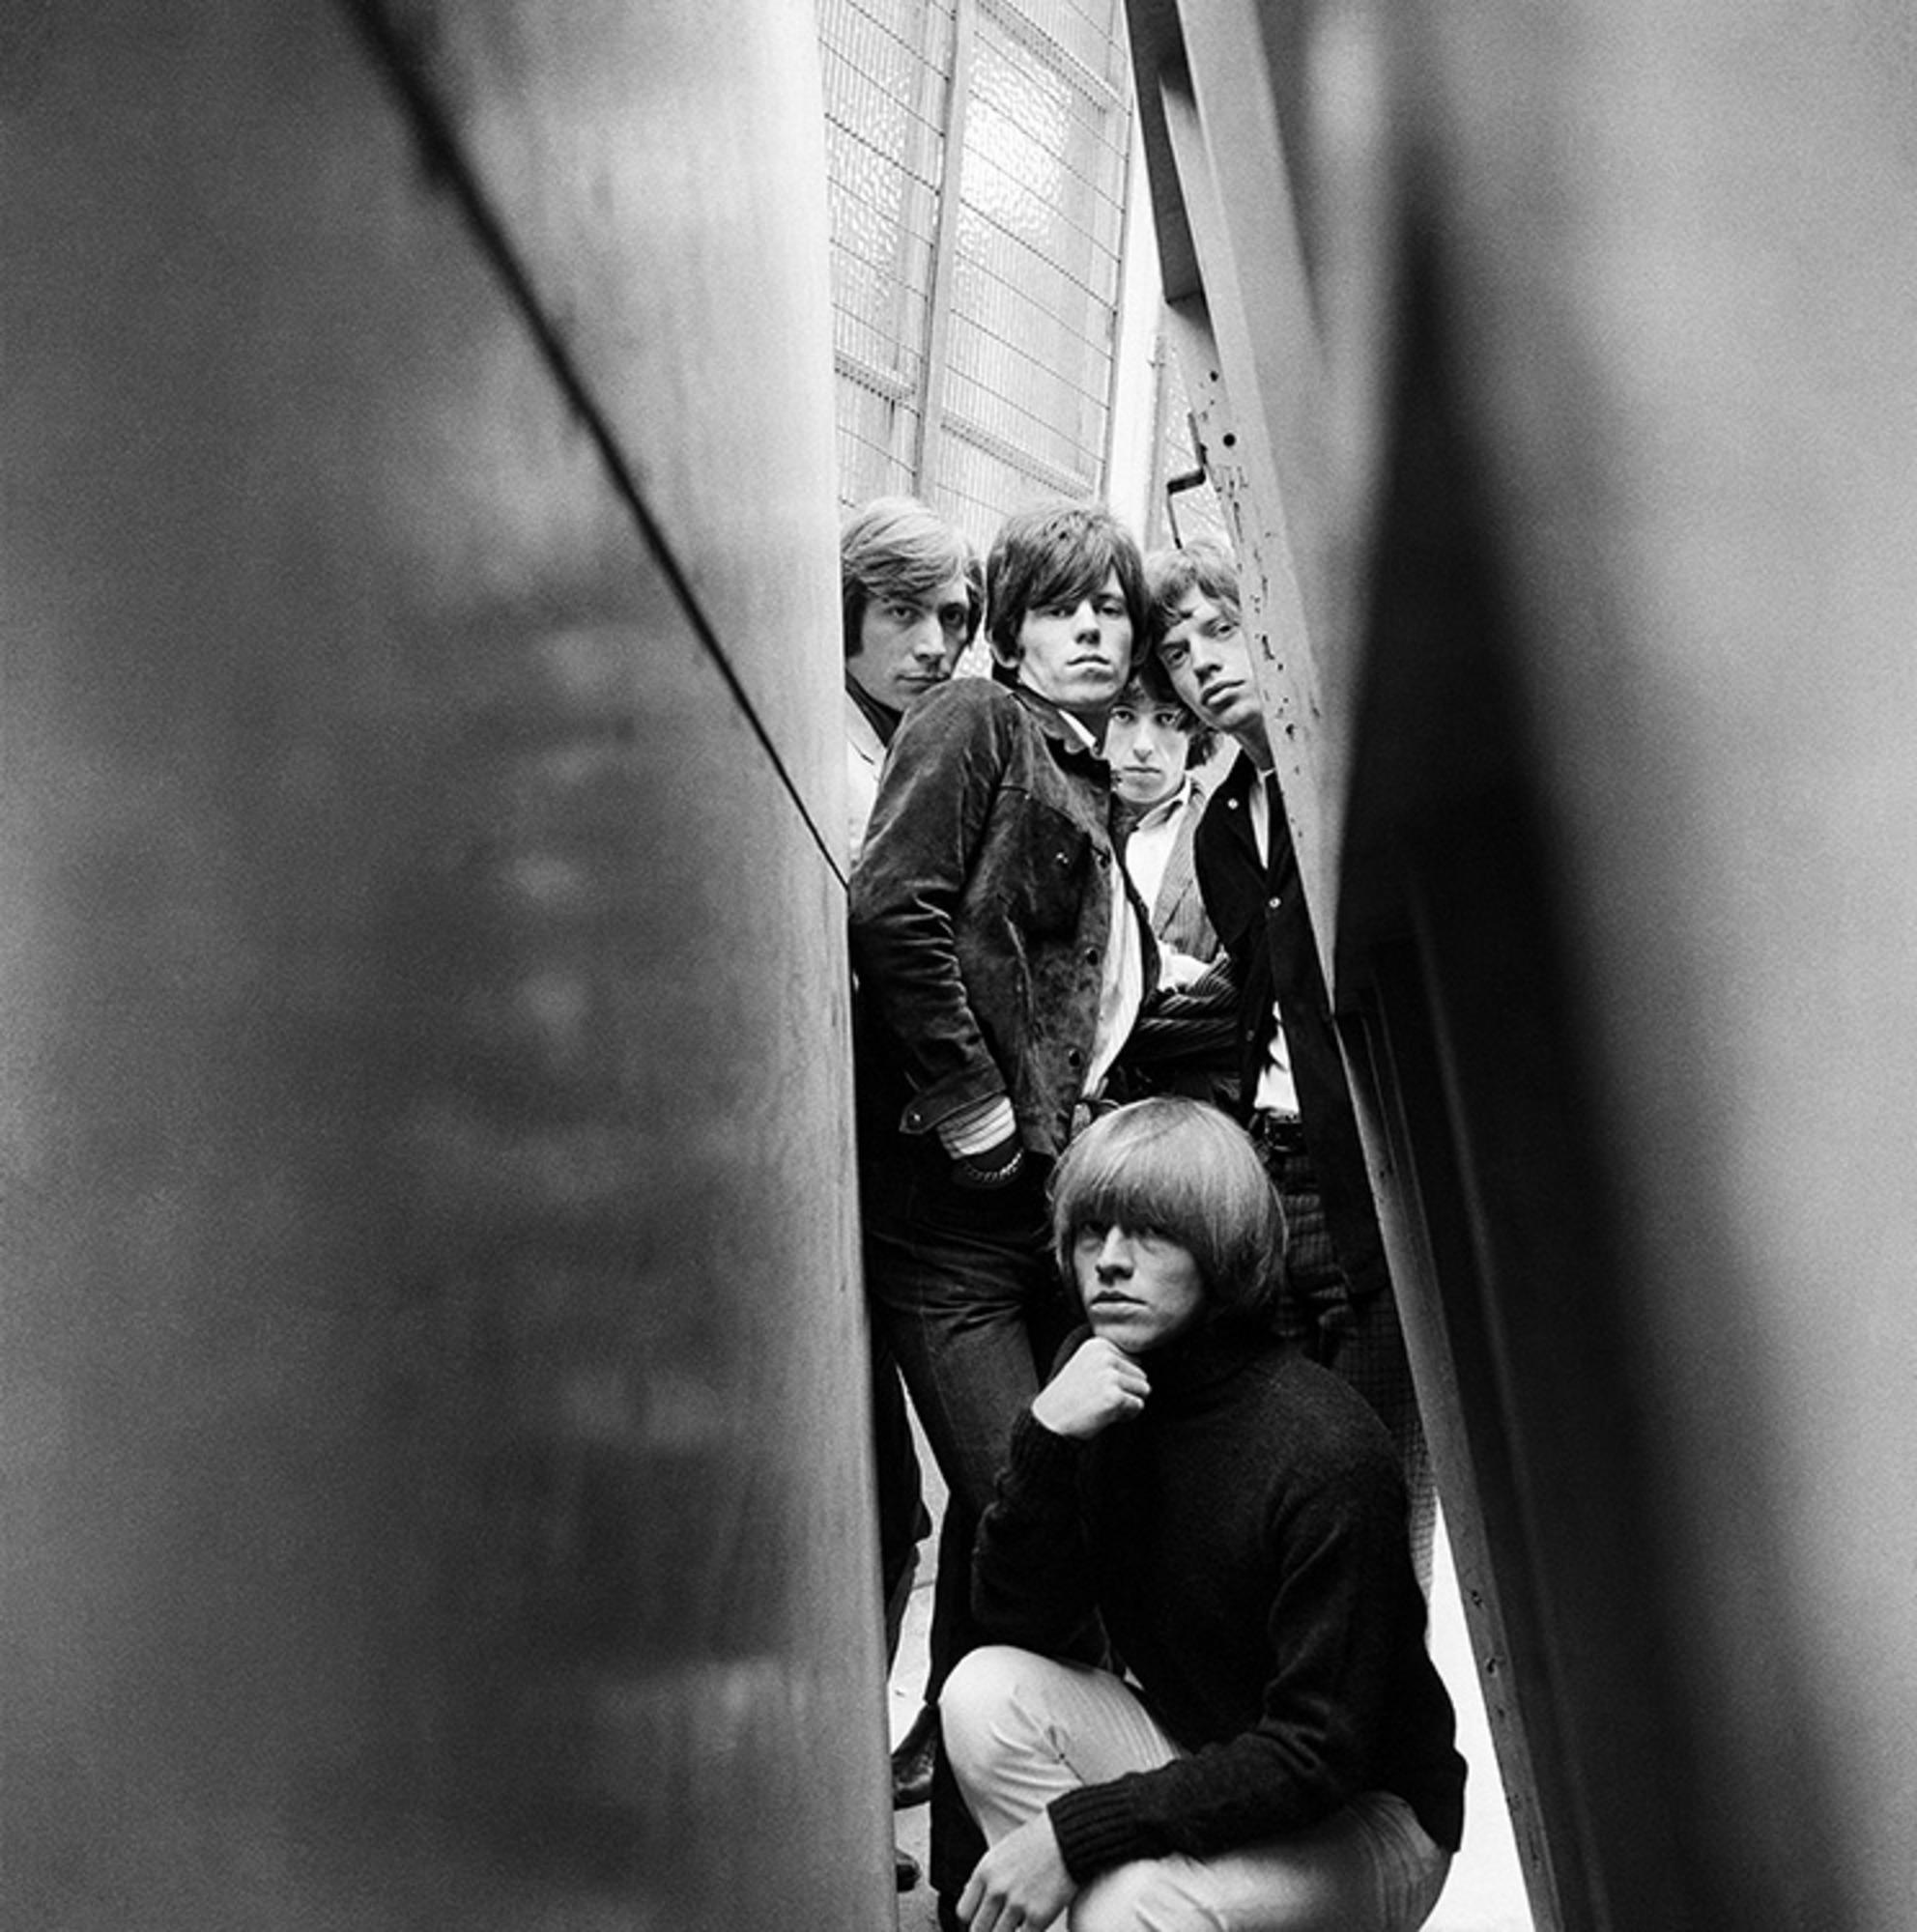 Gelatin-silver, signed and numbered

British rock band The Rolling Stones (Mick Jagger, Keith Richards, Charlie Watts, Bill Wyman and Brian Jones) photographed in London, 1965.

Available Sizes:
16" x 20” Edition of 50
20" x 24” Edition of 50
30" x